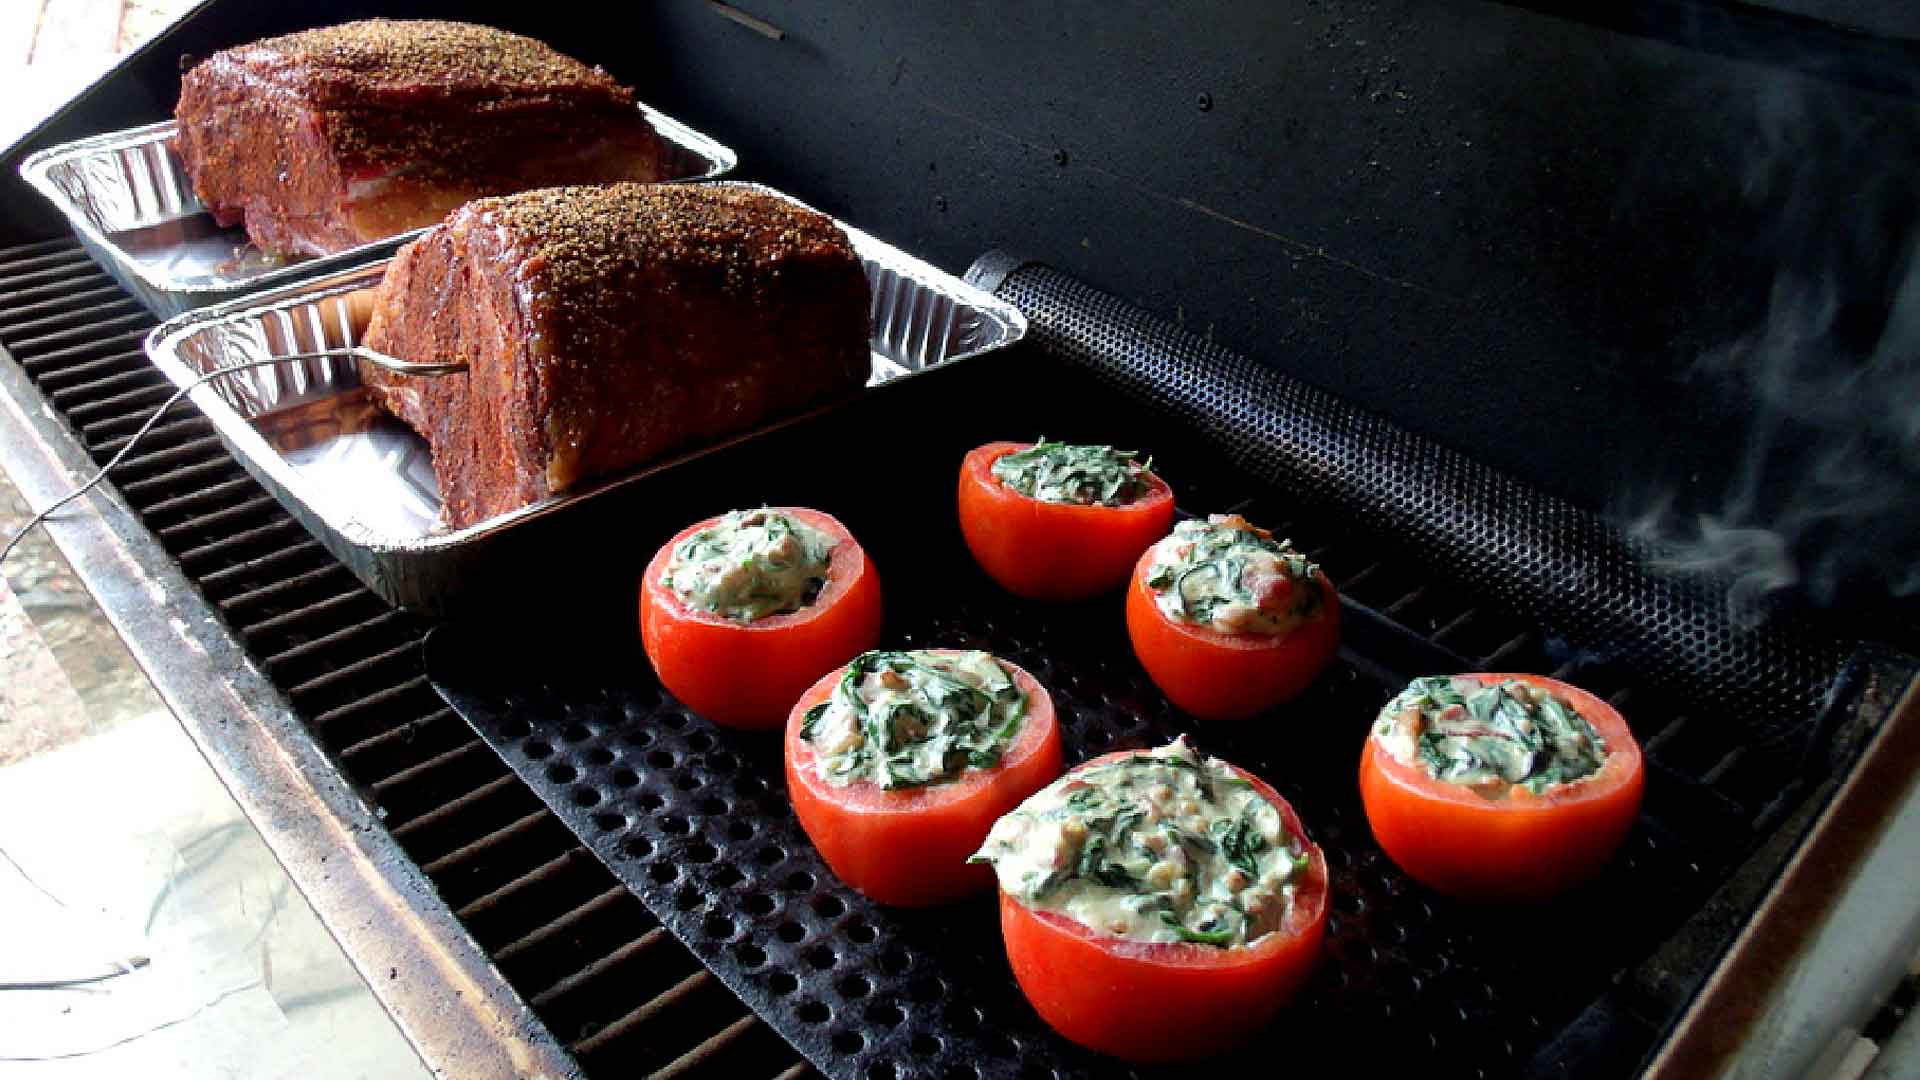 Stuffed tomatoes and meat on grill